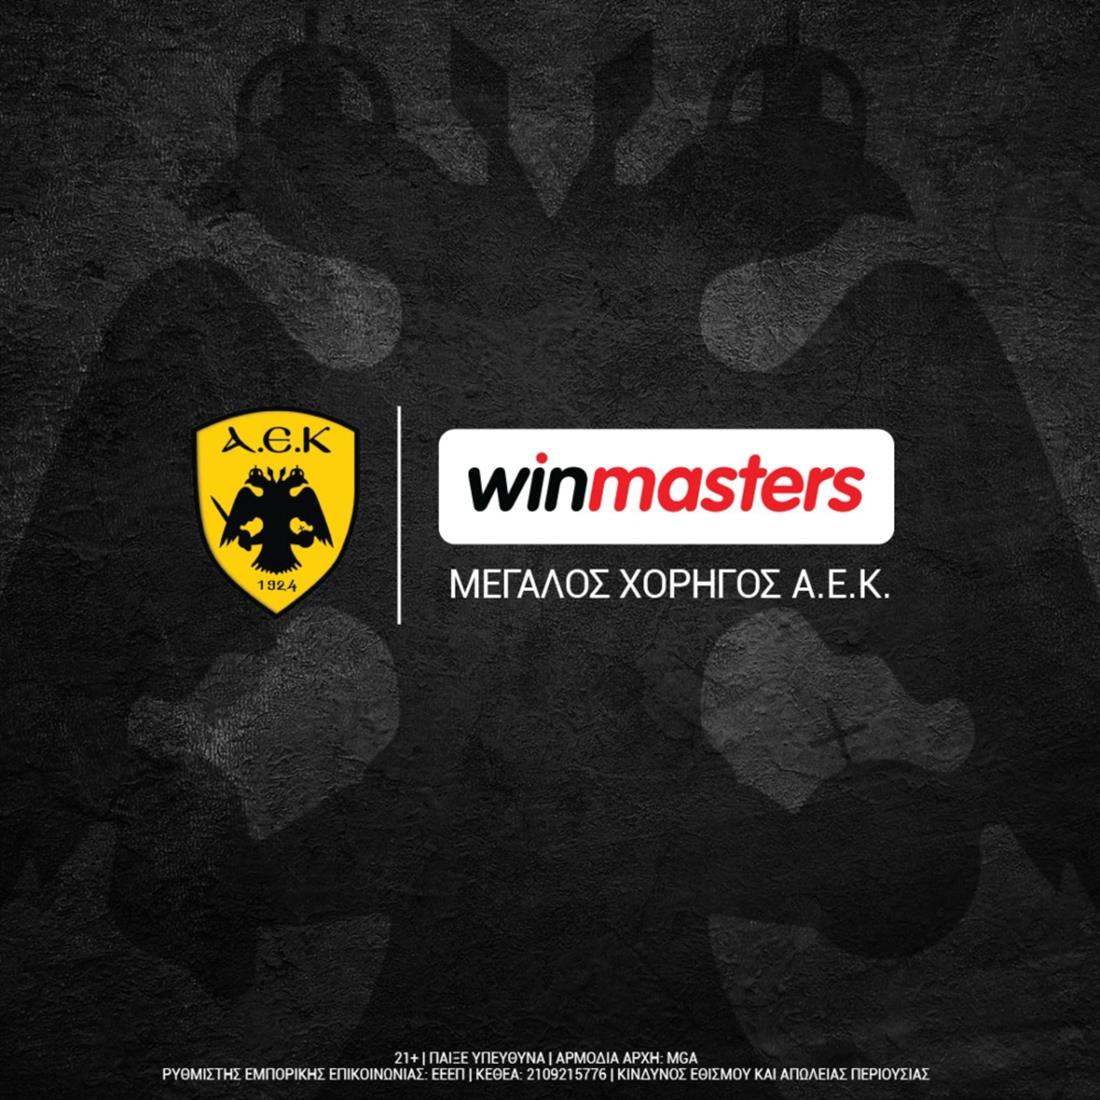 winmasters - ΑΕΚ